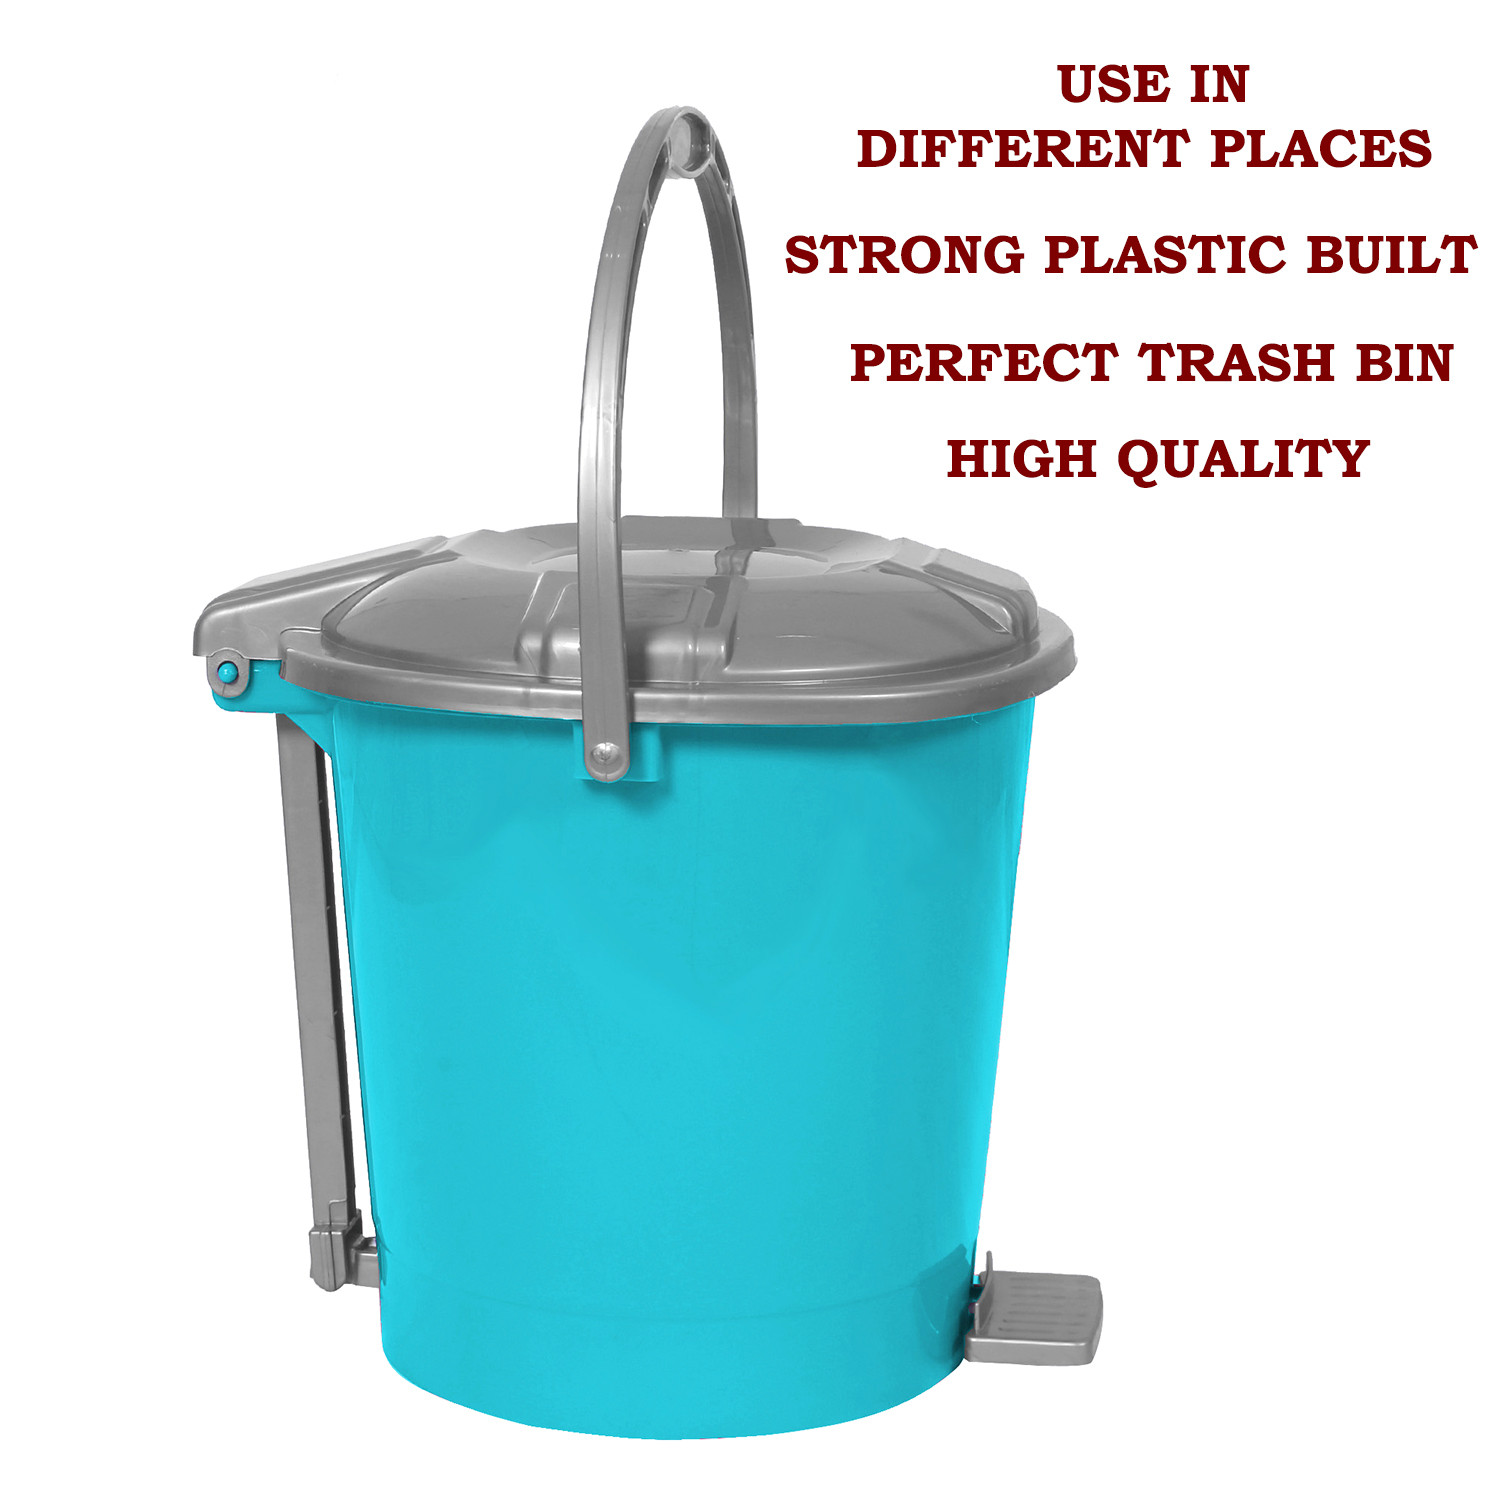 Kuber Industries Durable Plastic Pedal Dustbin|Waste Bin|Trash Can For Kitchen & Home With Handle,7 Litre,Pack of 2 (Sky Blue)